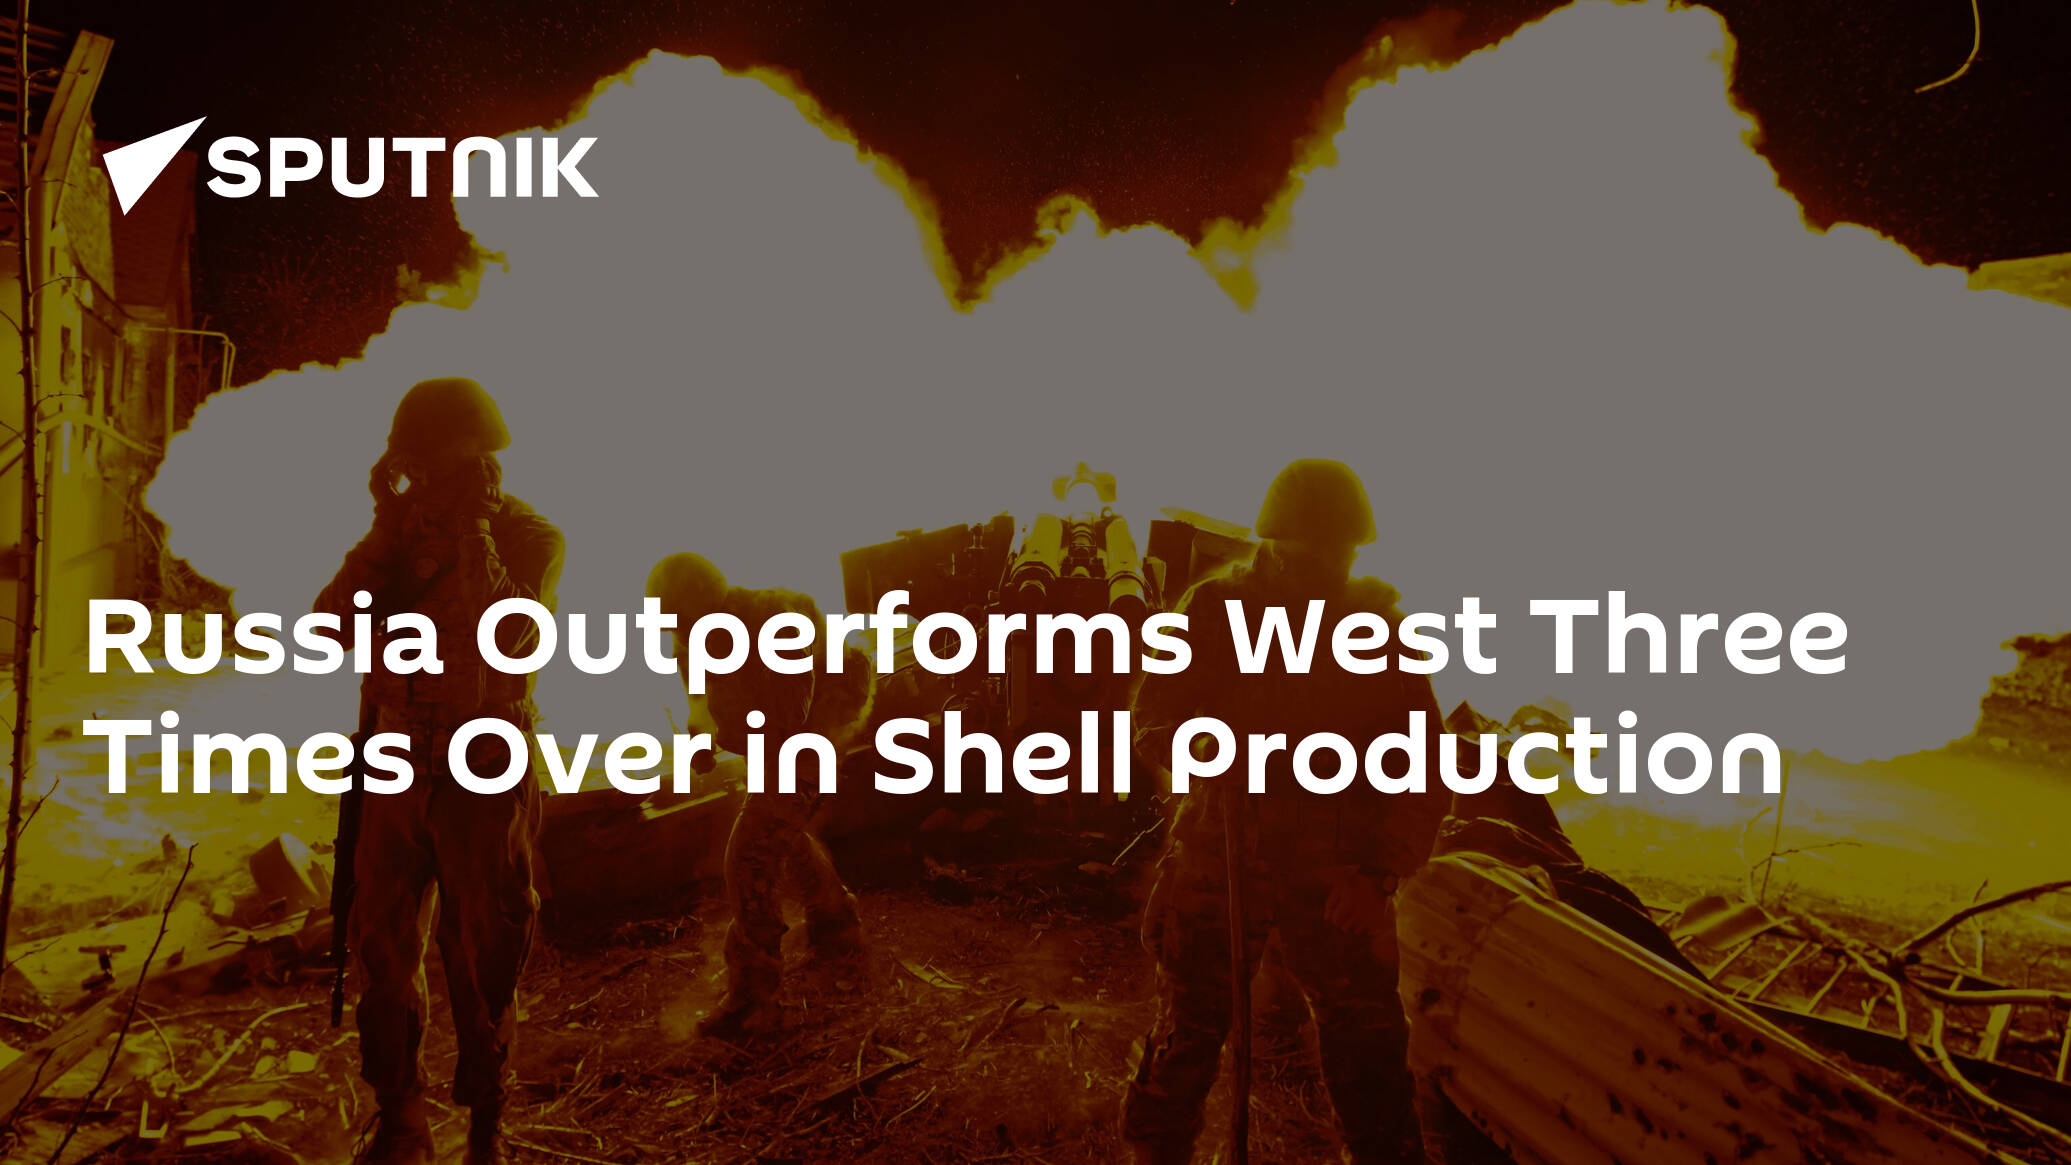 Russia Outperforms West Three Times Over in Shell Production